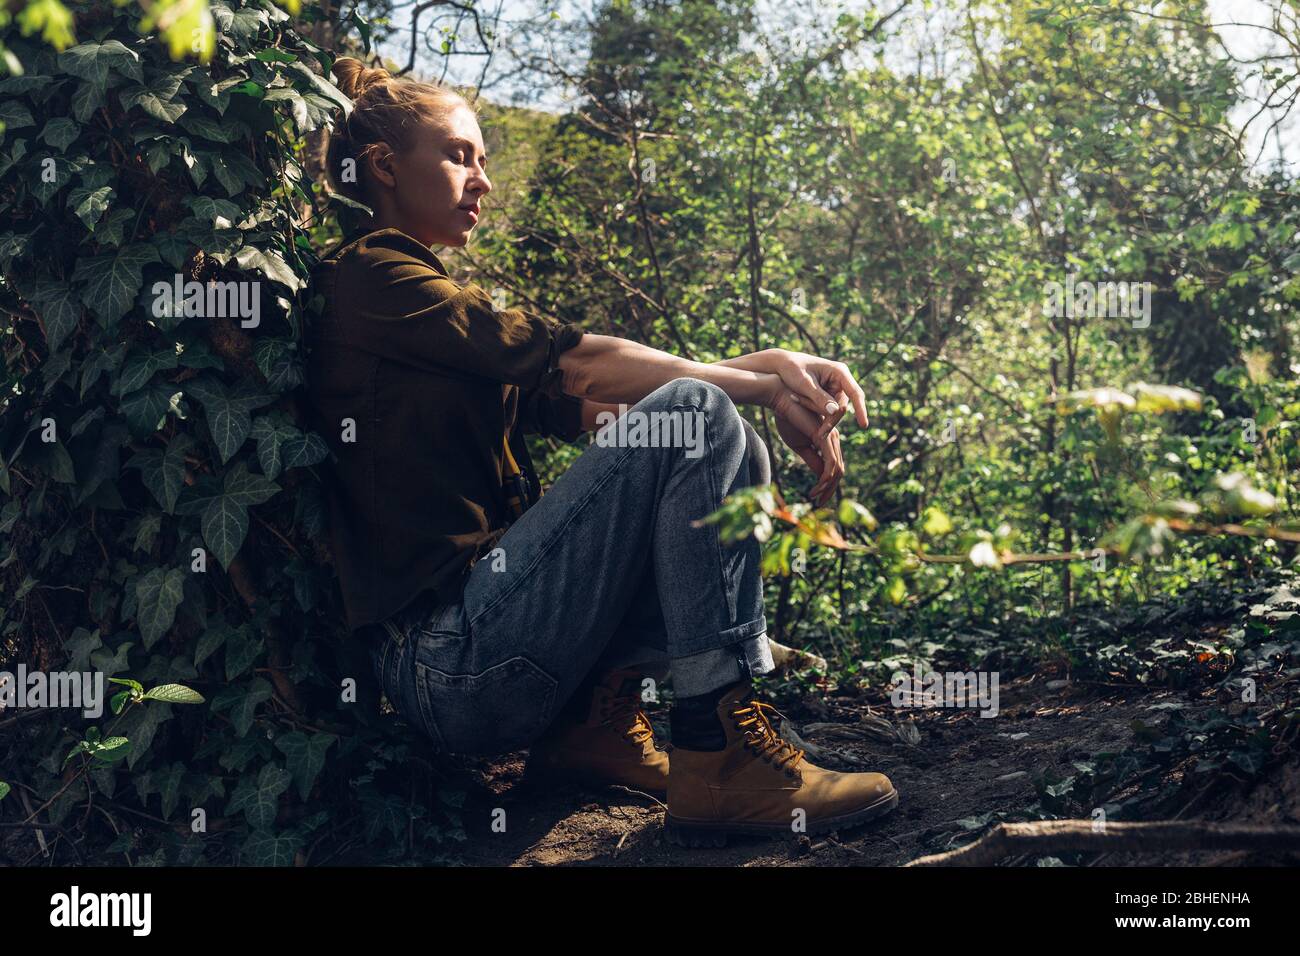 Girl with closed eyes resting, leaning against tree. Tourism Hiking Survival Bushcraft Concept Stock Photo